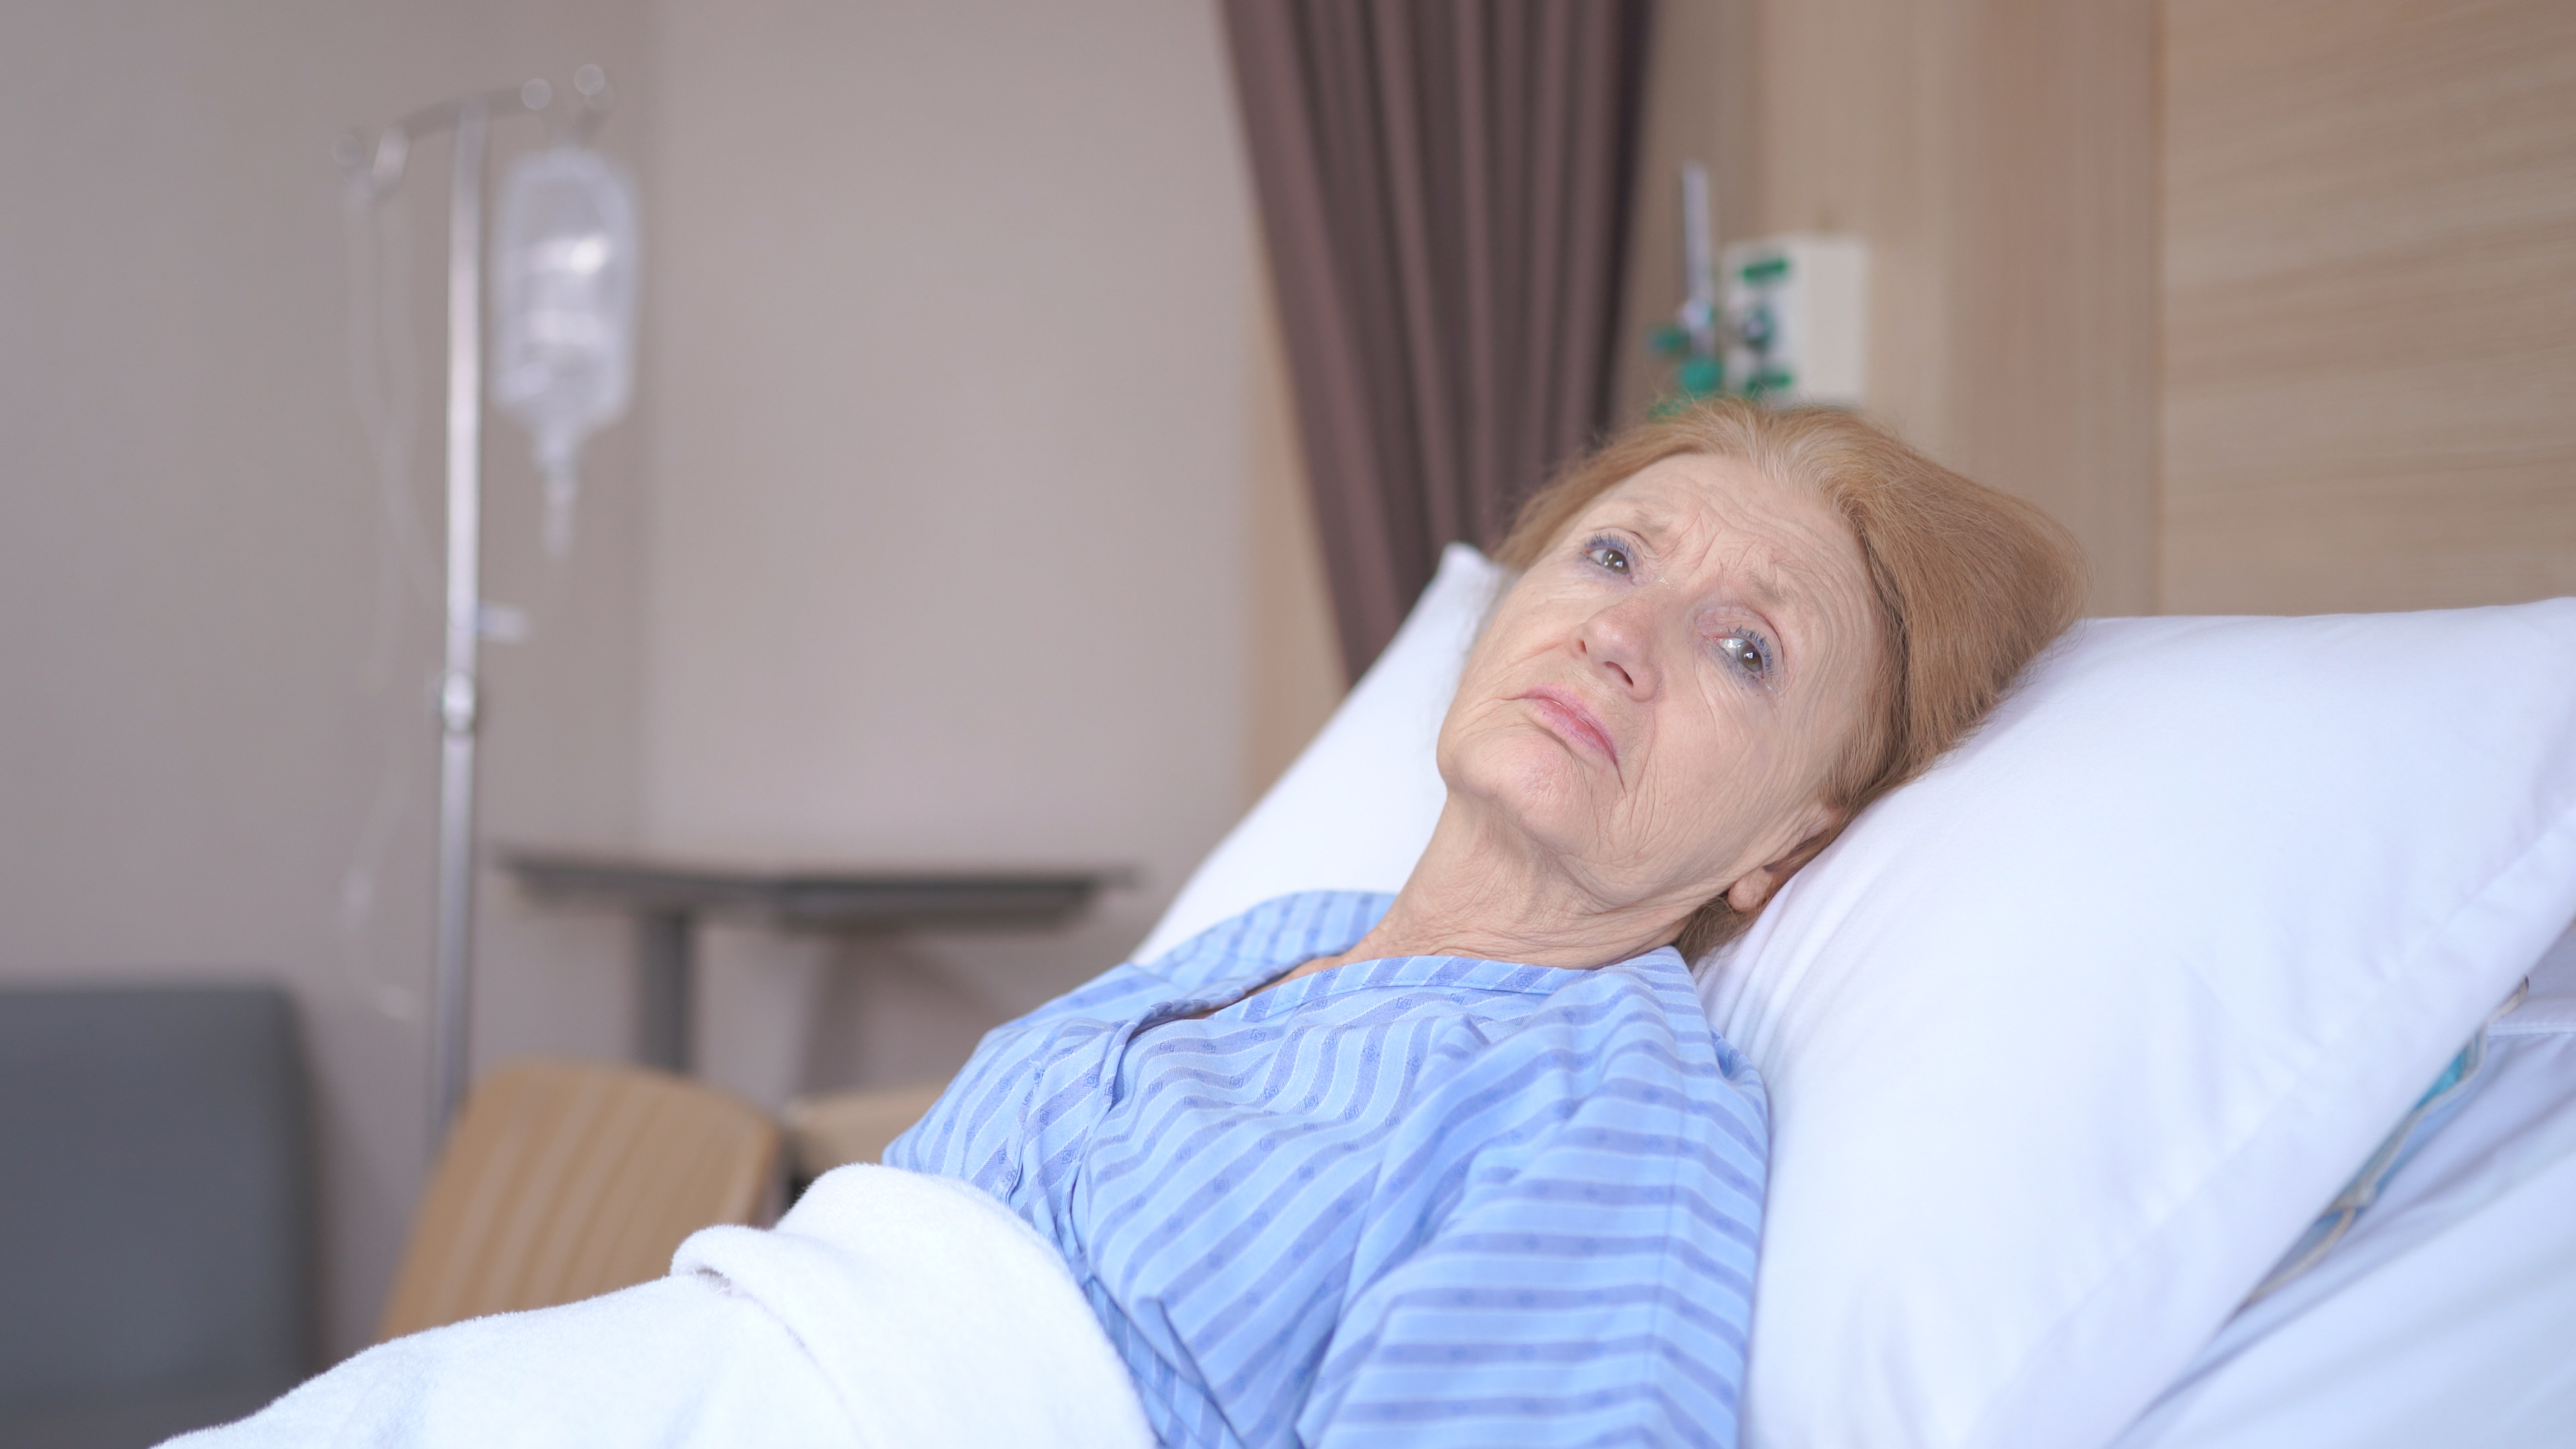 An unhappy senior woman in a hospital bed | Source: Shutterstock